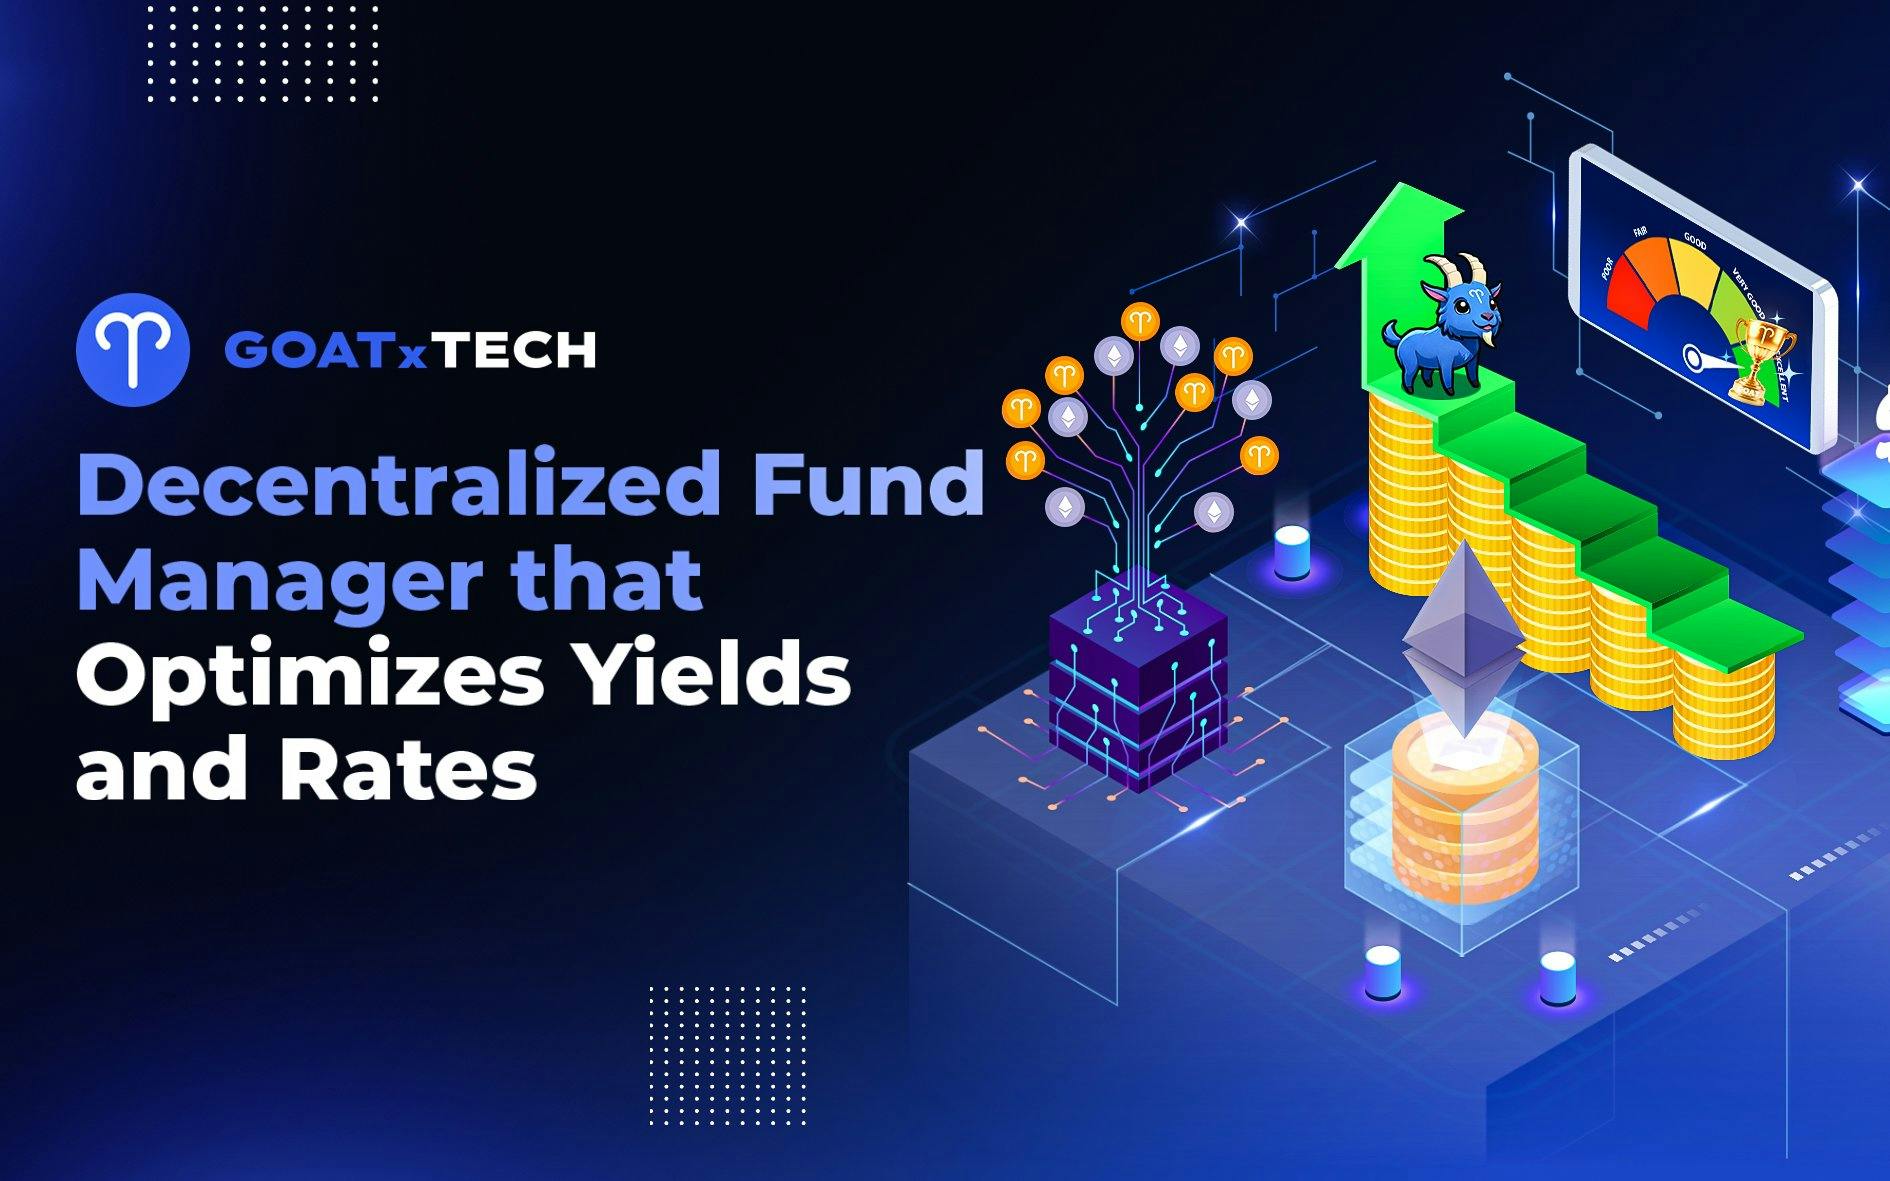 Goat.Tech - Decentralized Fund Manager that Optimizes Yields and Rates